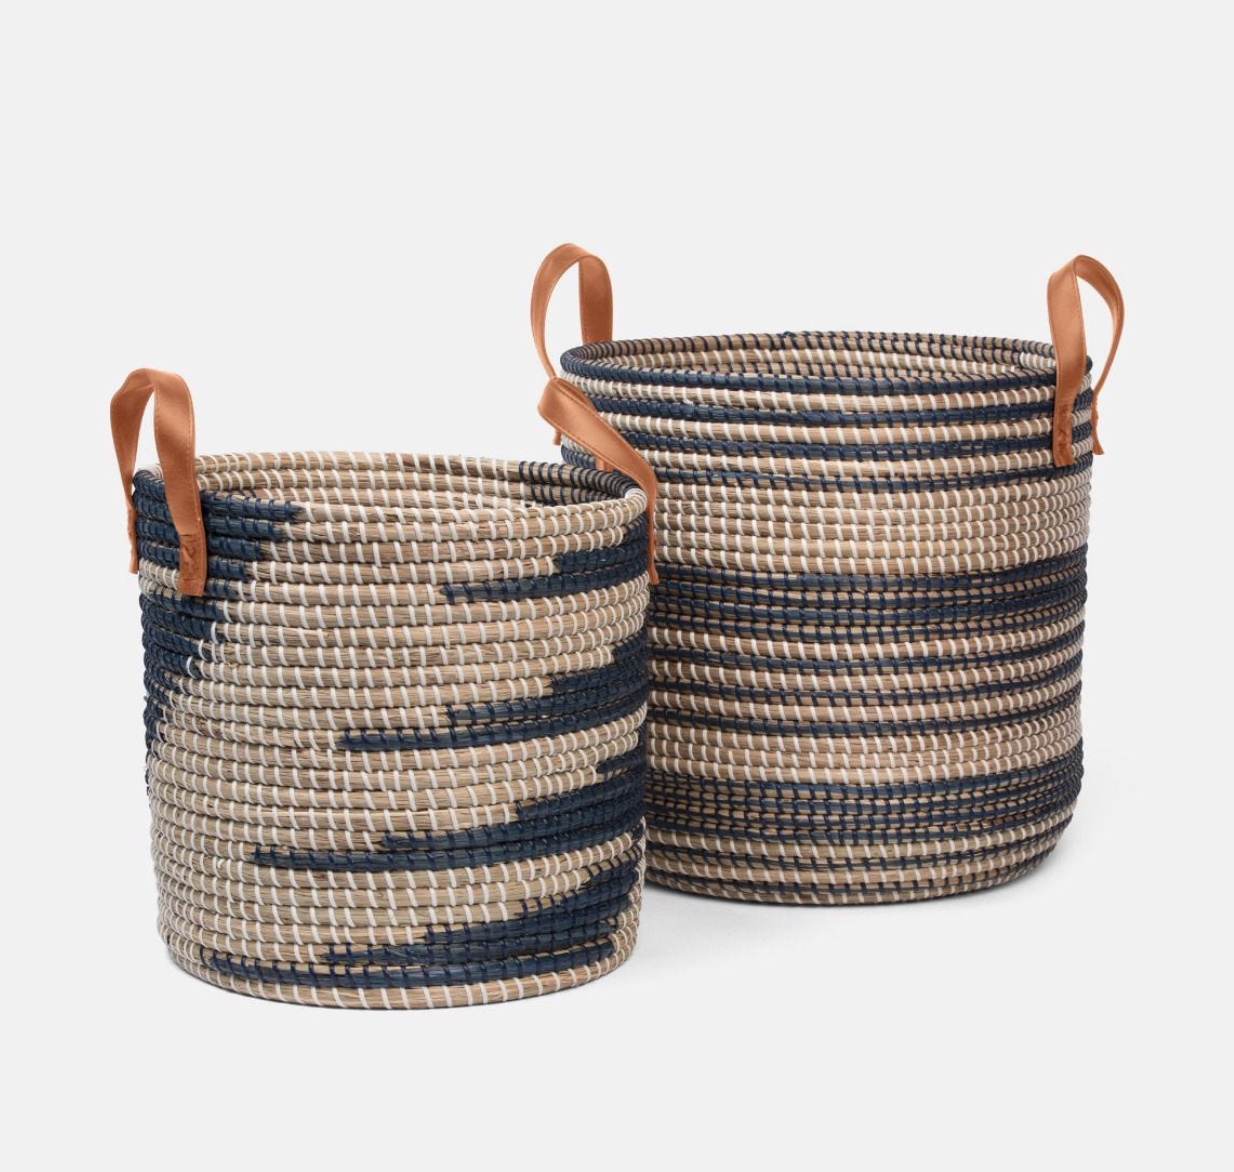 BASKETS NATURAL SEAGRASS (Available in 2 Sizes and Finishes)